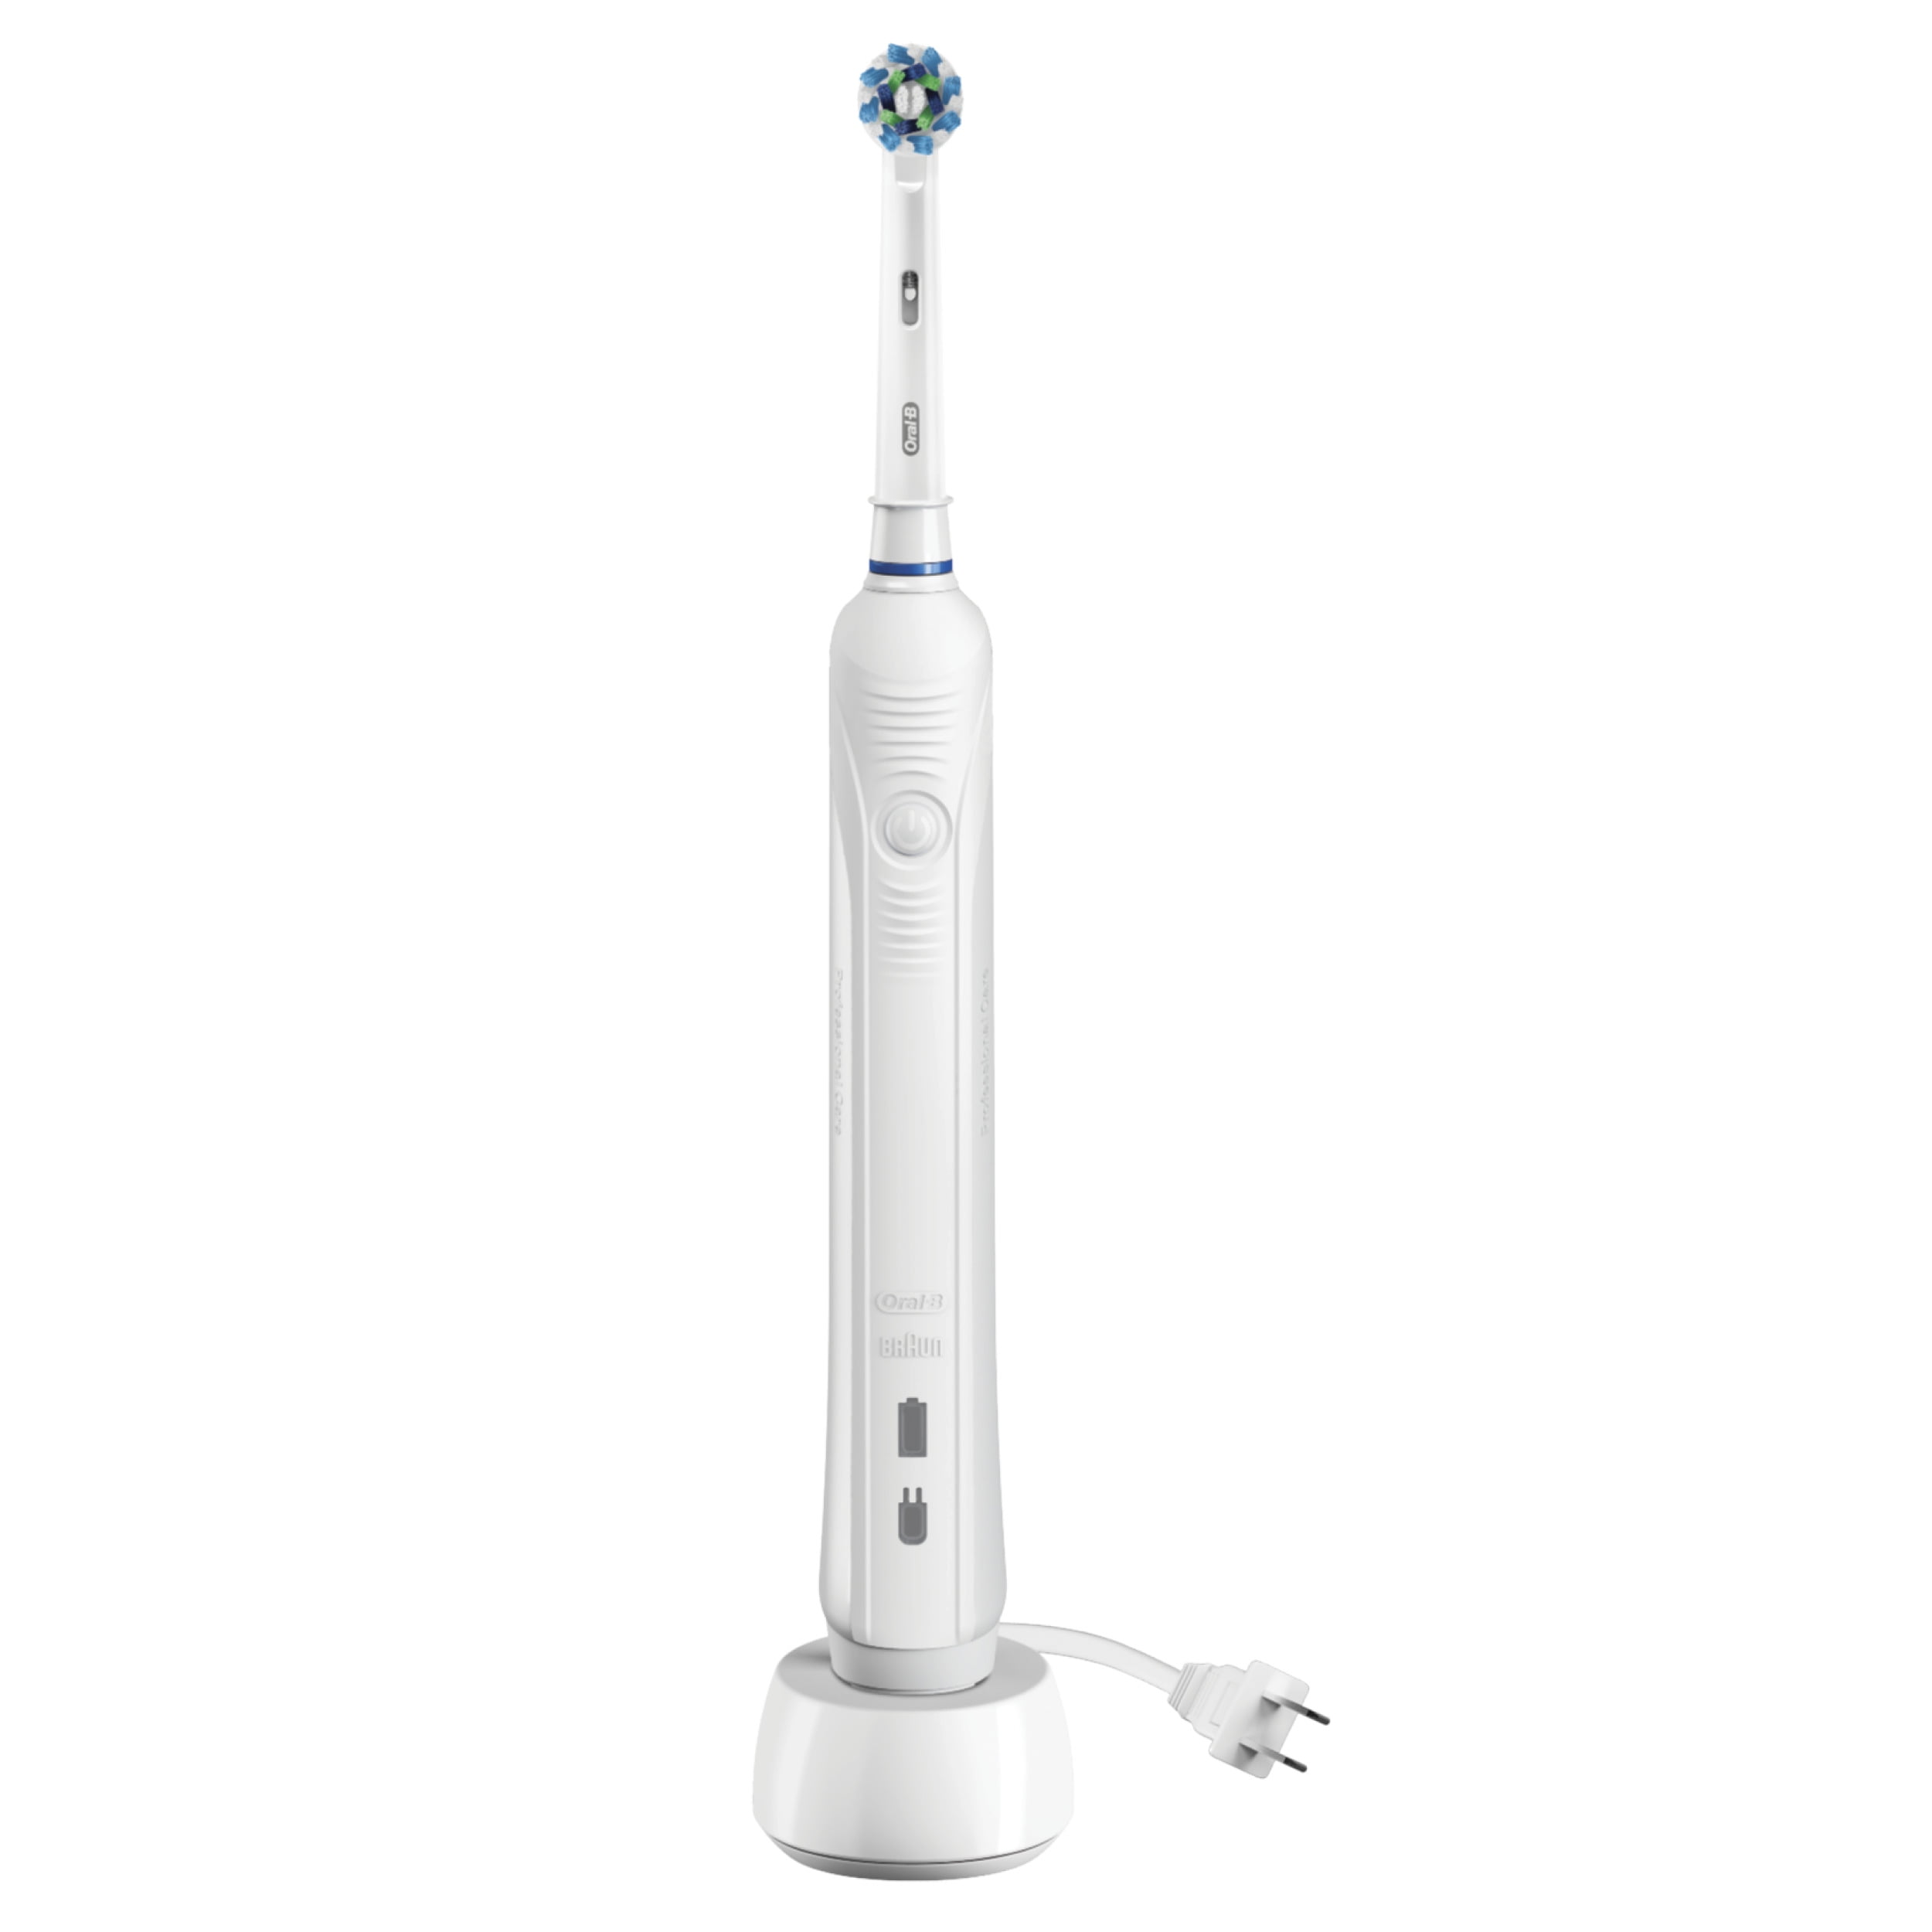 72-info-oral-b-toothbrush-with-video-tutorial-brush